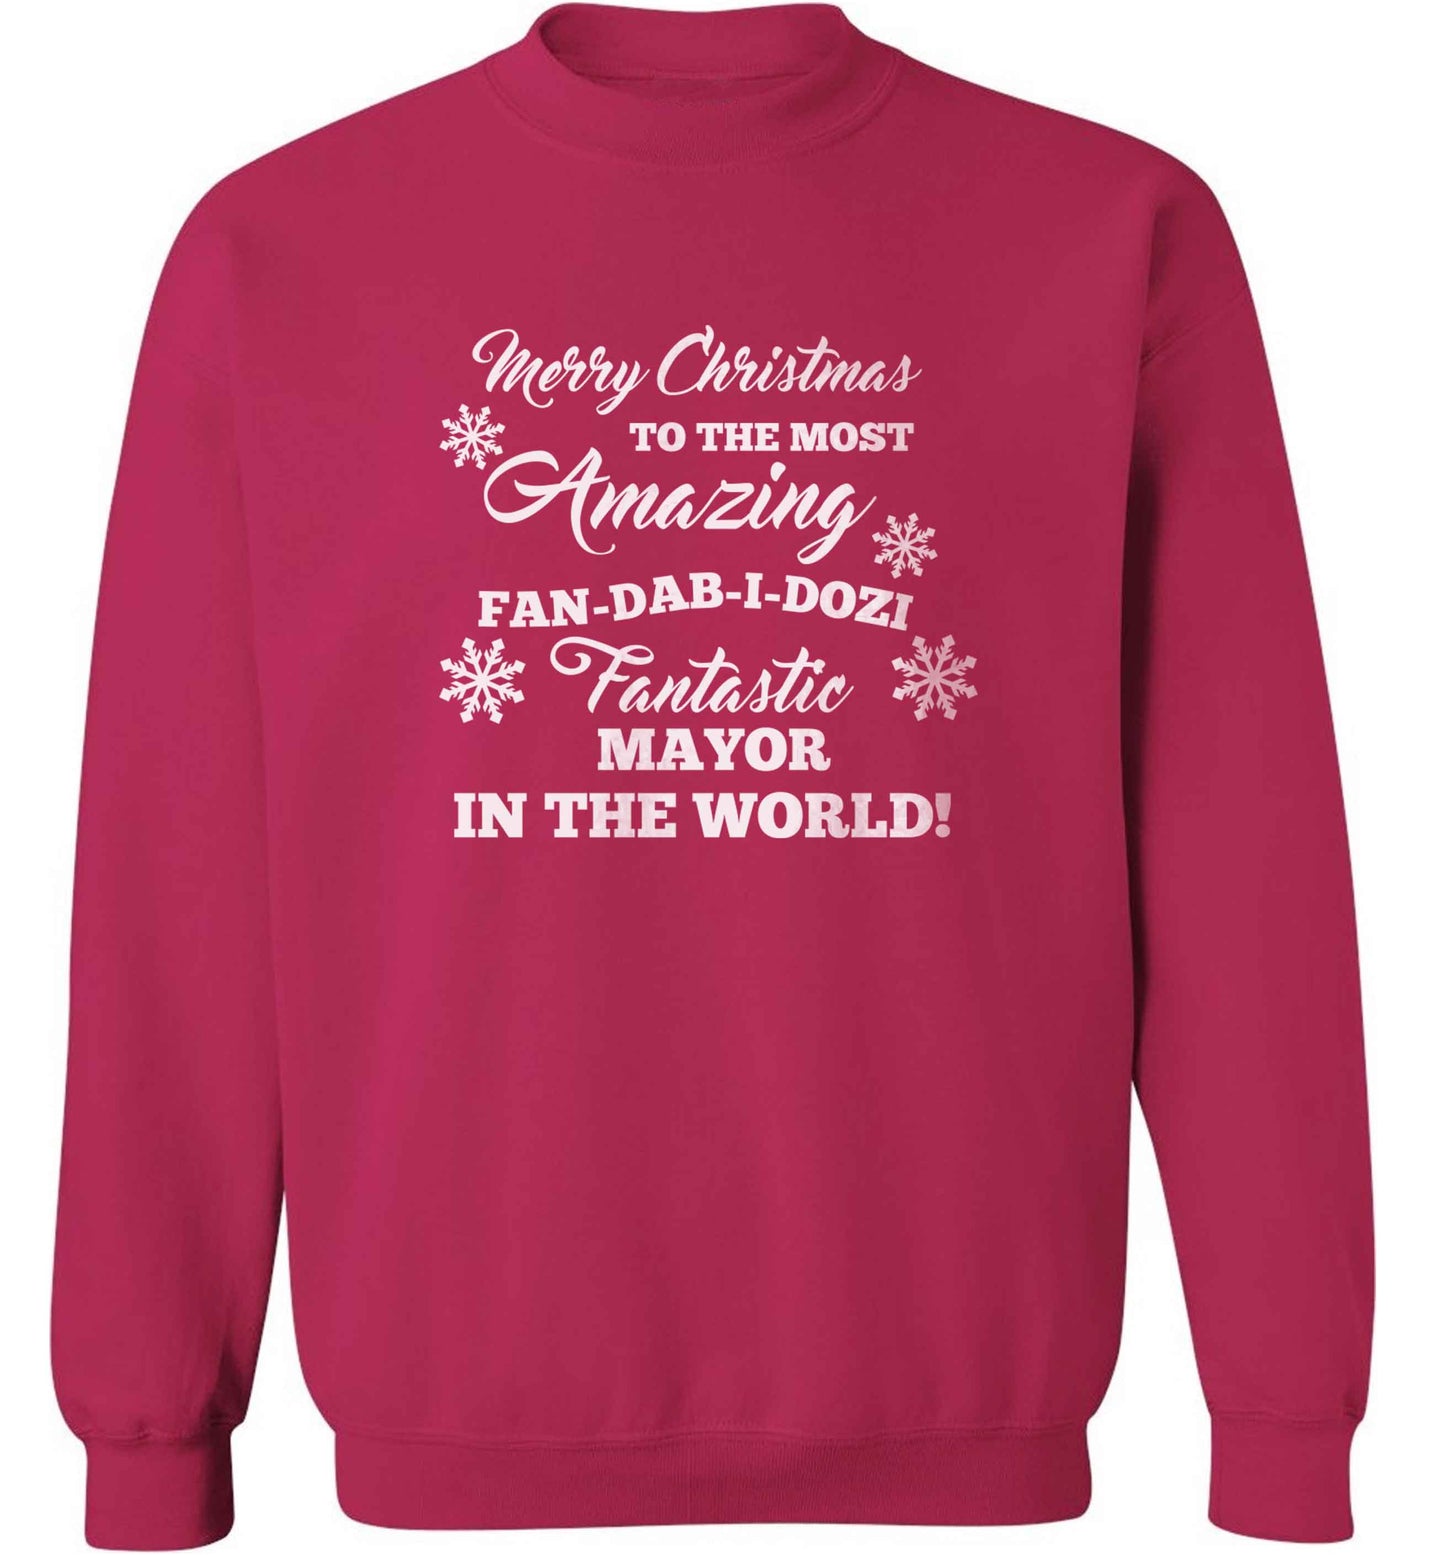 Merry Christmas to the most amazing fireman in the world! adult's unisex pink sweater 2XL